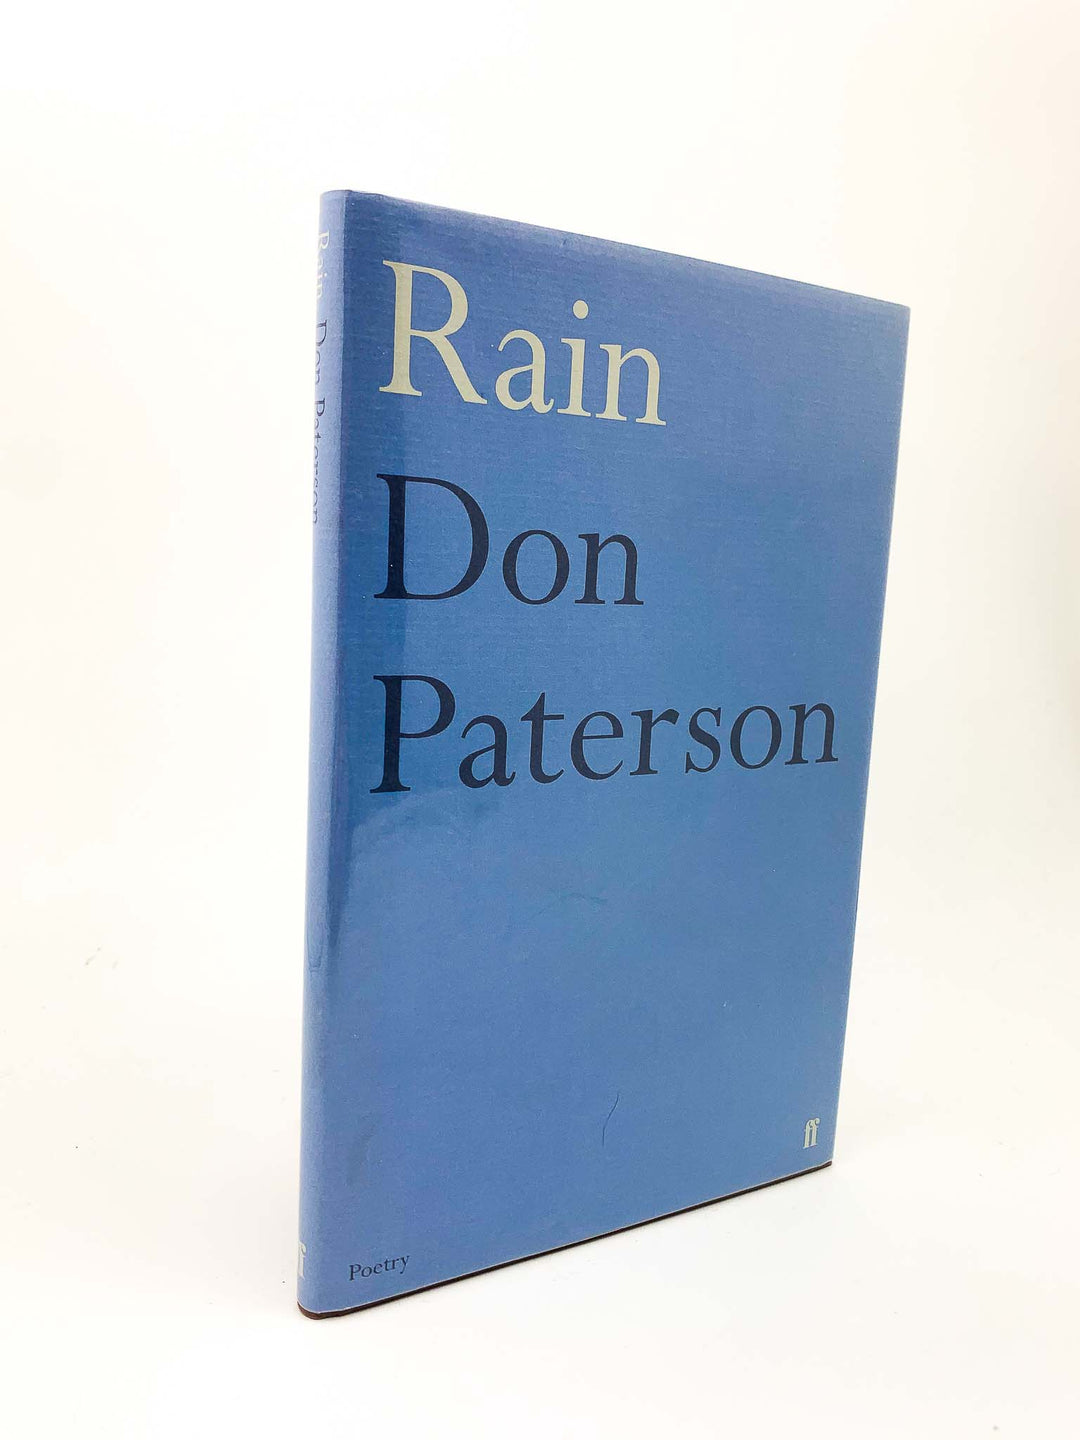 Paterson, Don - Rain - SIGNED | front cover